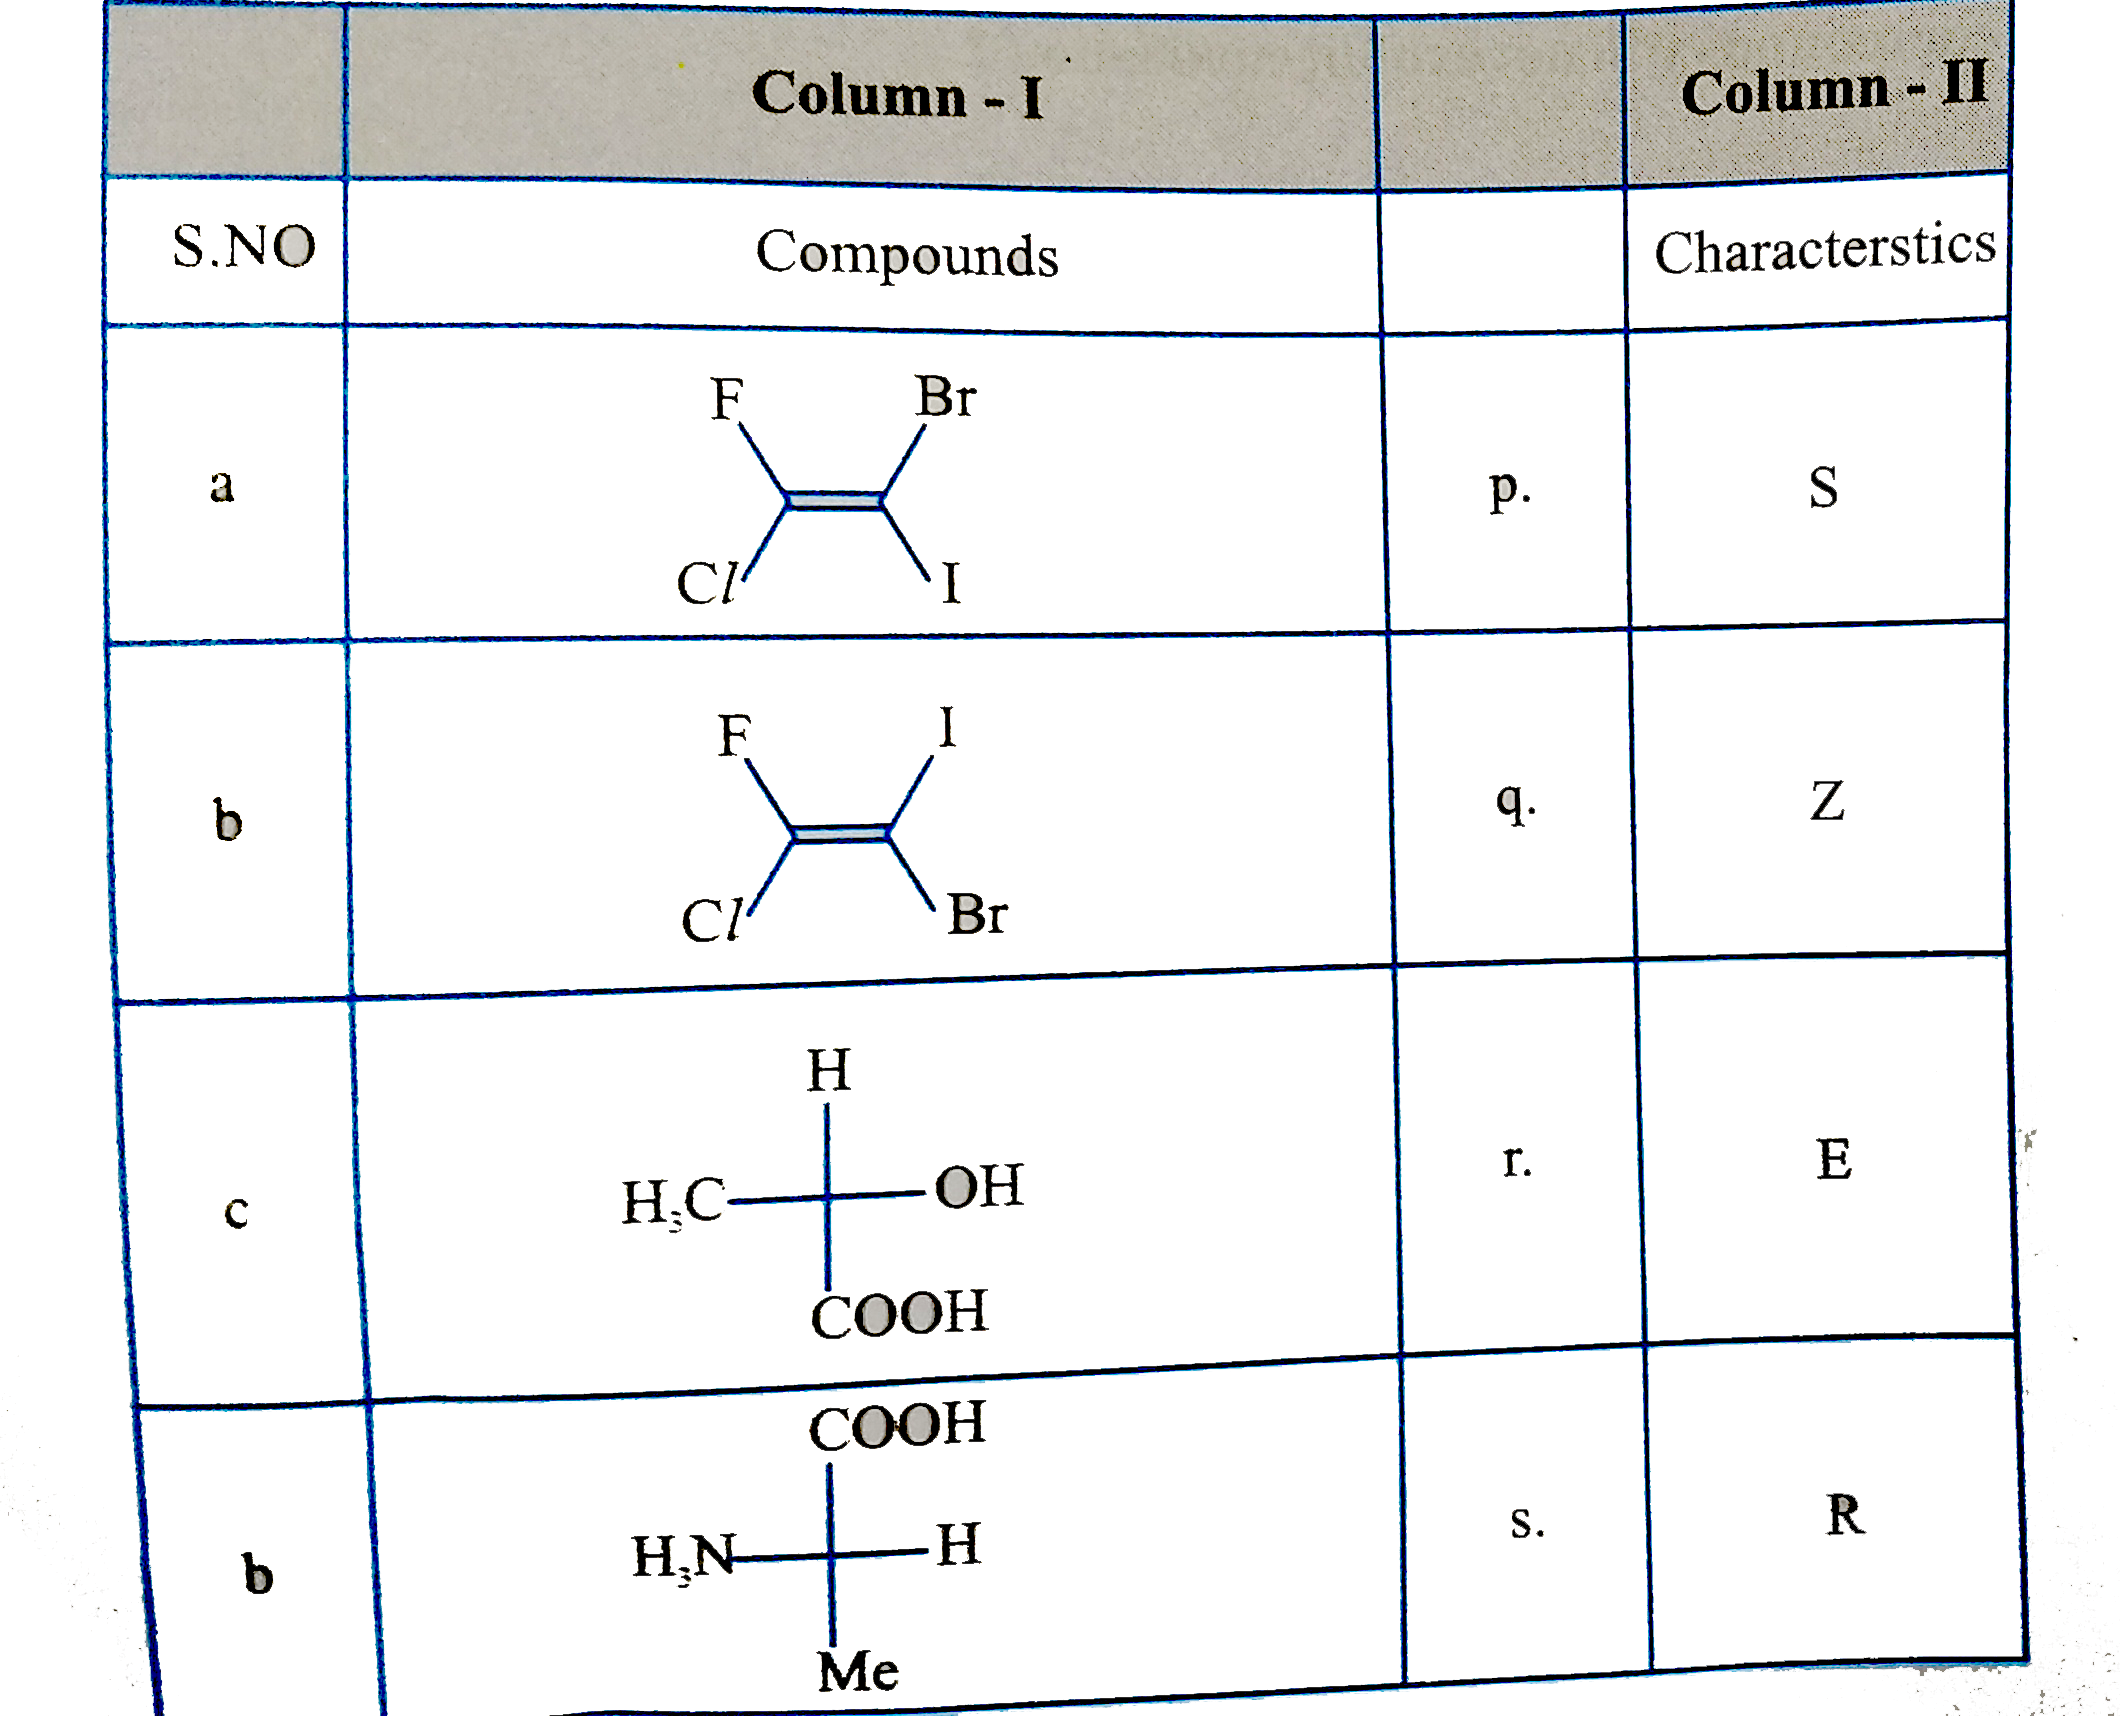 Match the following compounds in colummn I with configuration in Column II